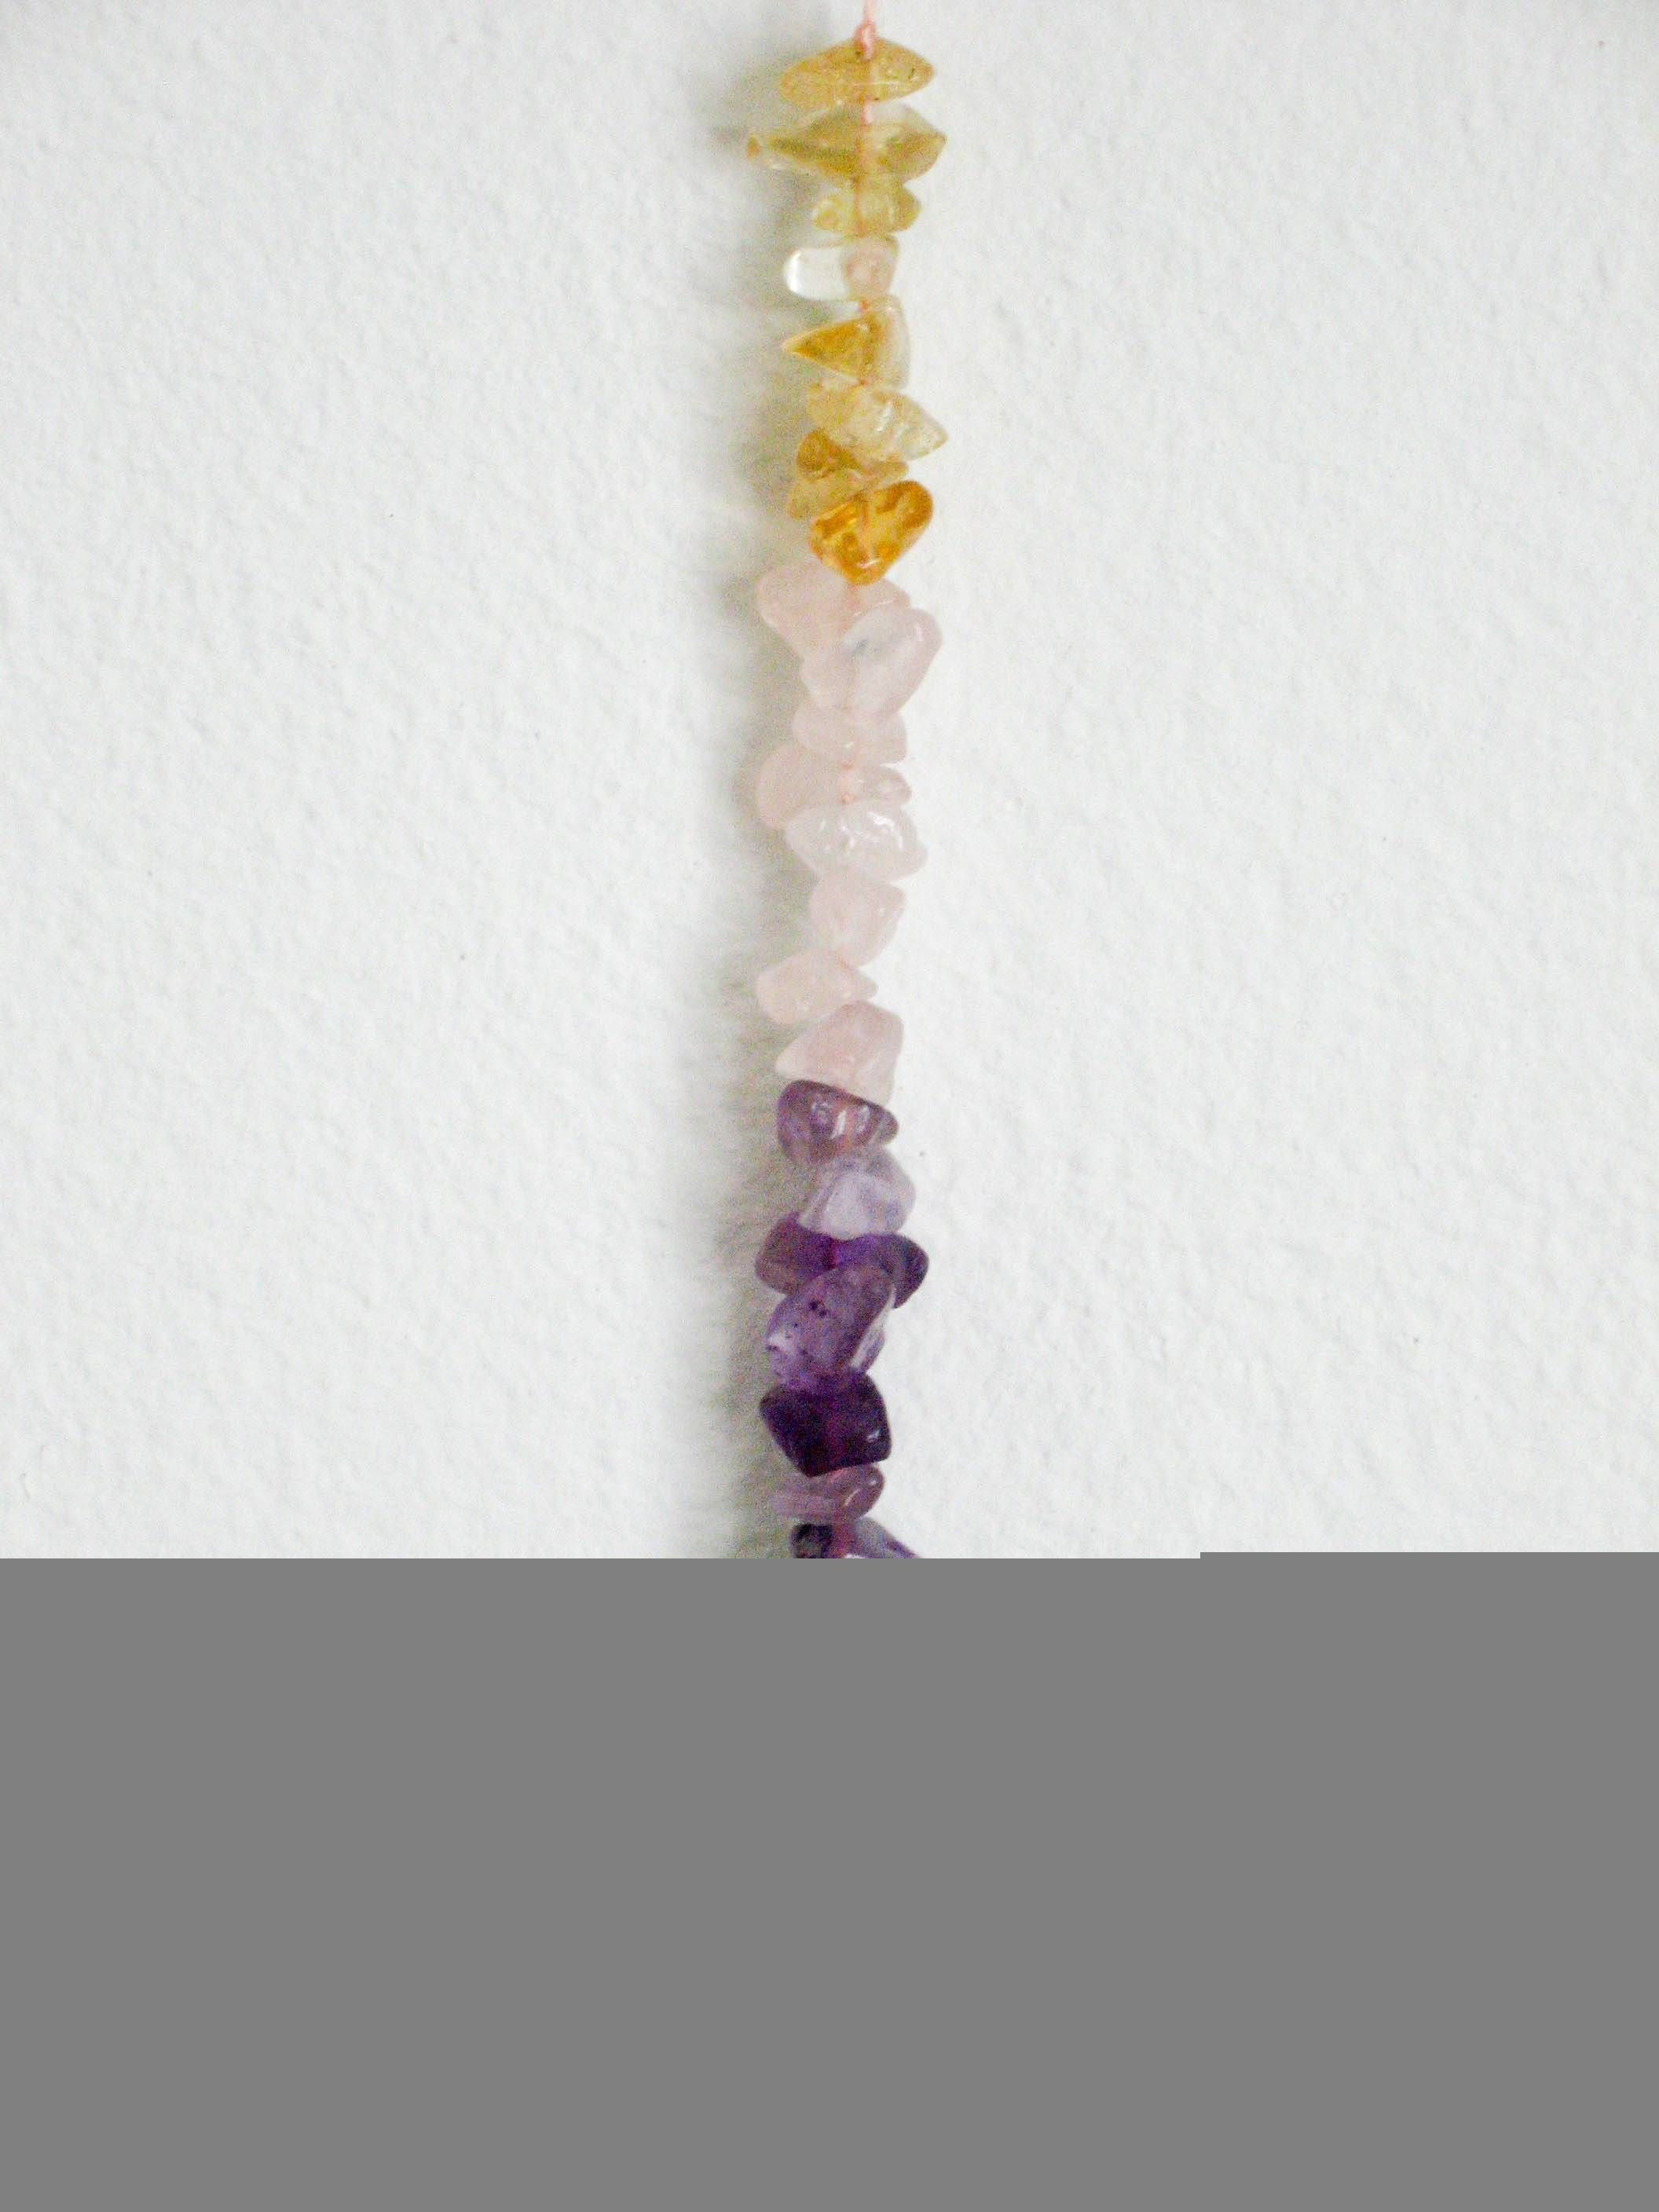 Dreamy Wall Decor, Gemstone Wall Hanging, Dreamy Baby, Rainbow Pertaining To Most Up To Date Gemstone Wall Art (Gallery 31 of 31)